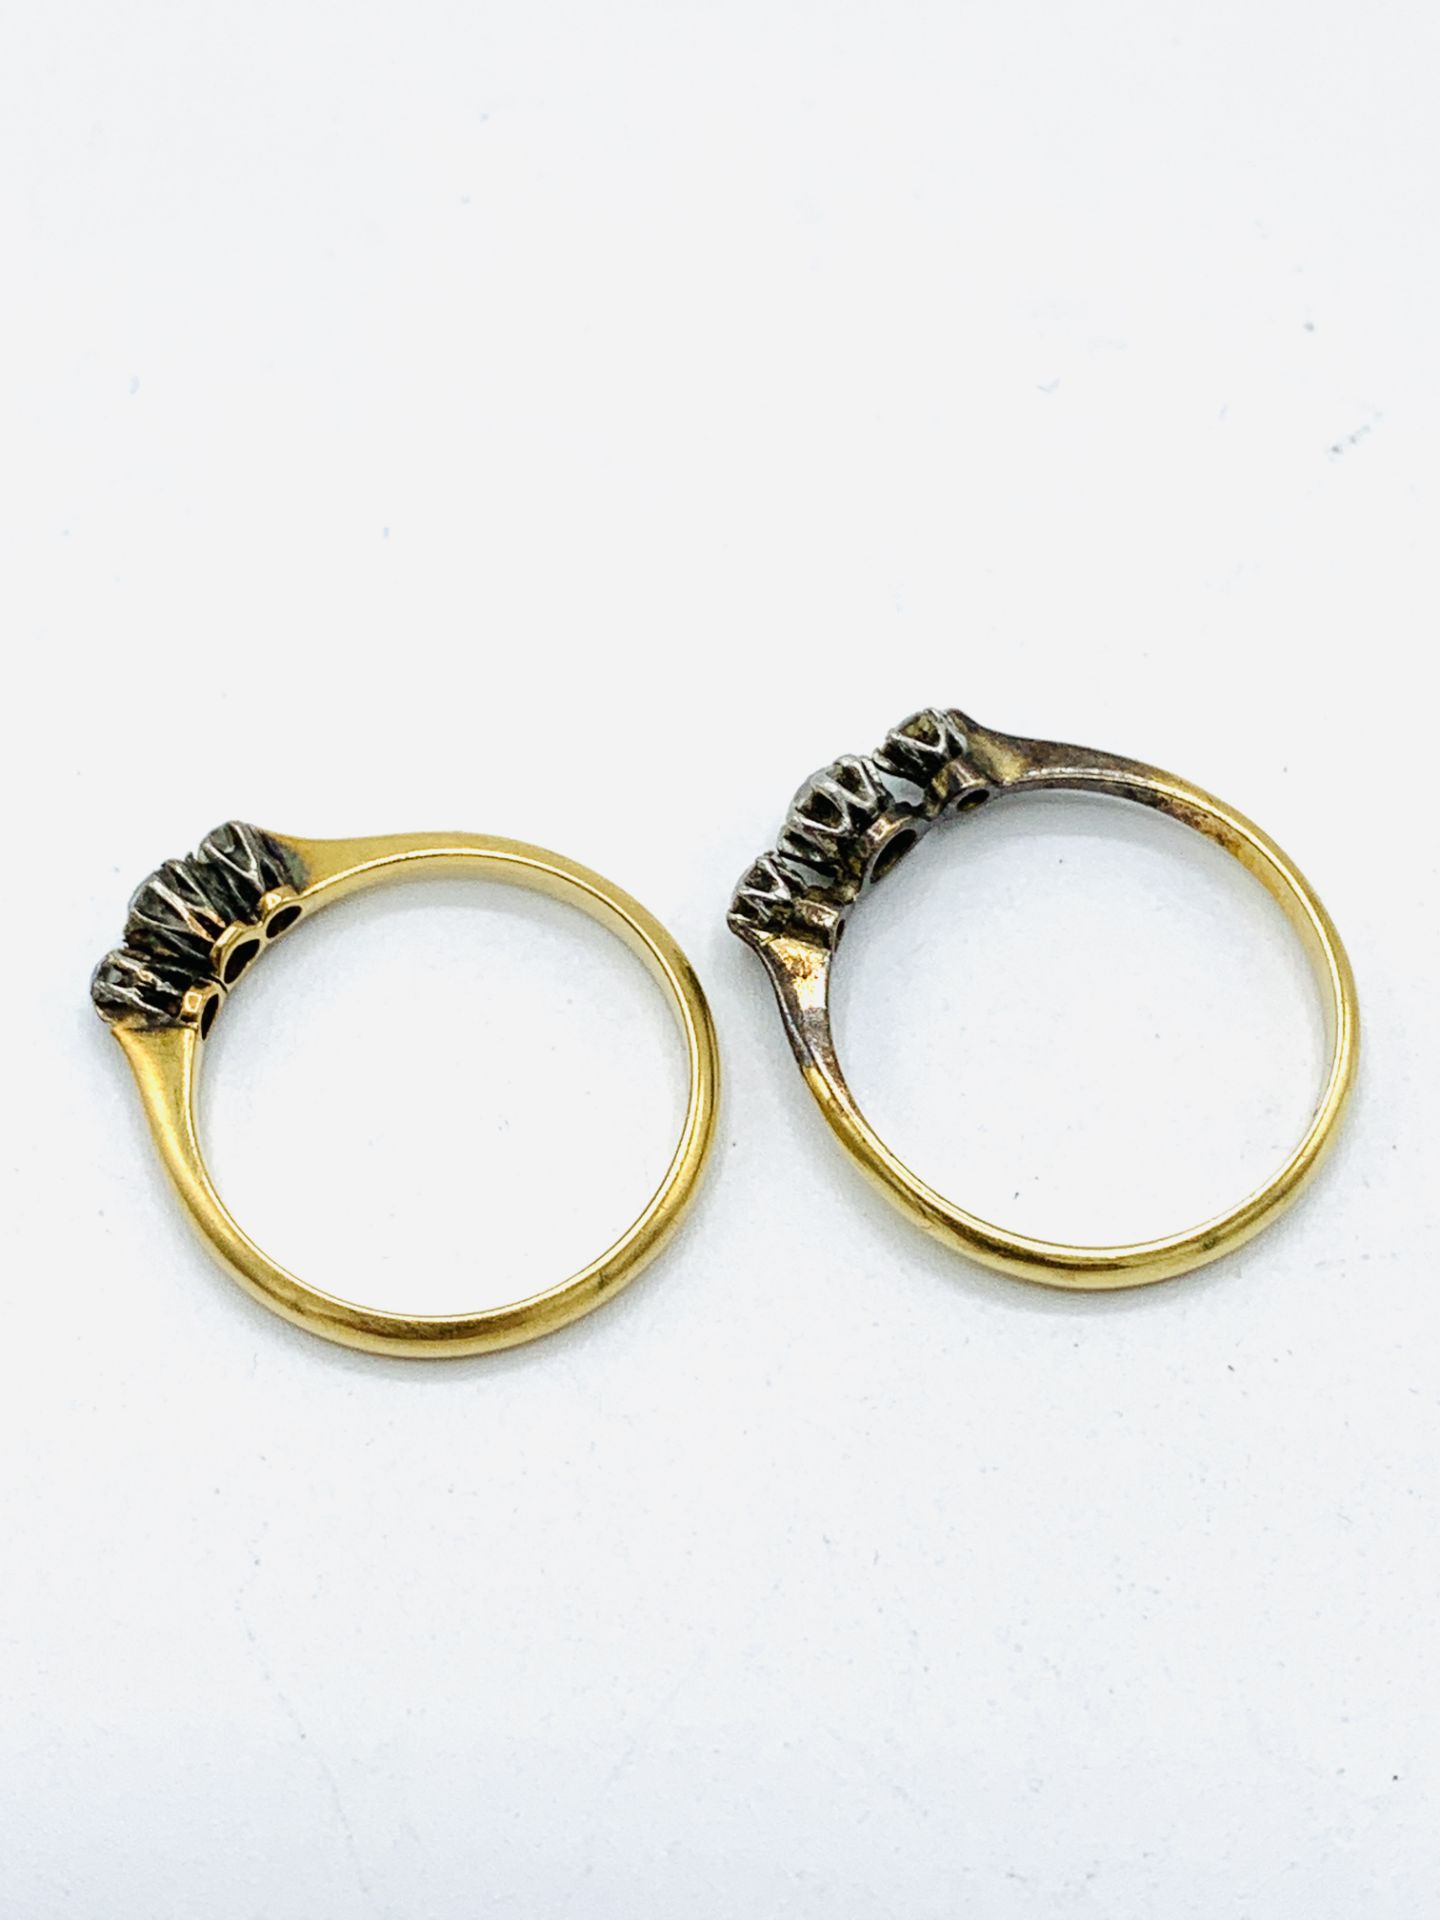 Two 18ct gold and 3 diamond rings - Image 3 of 4